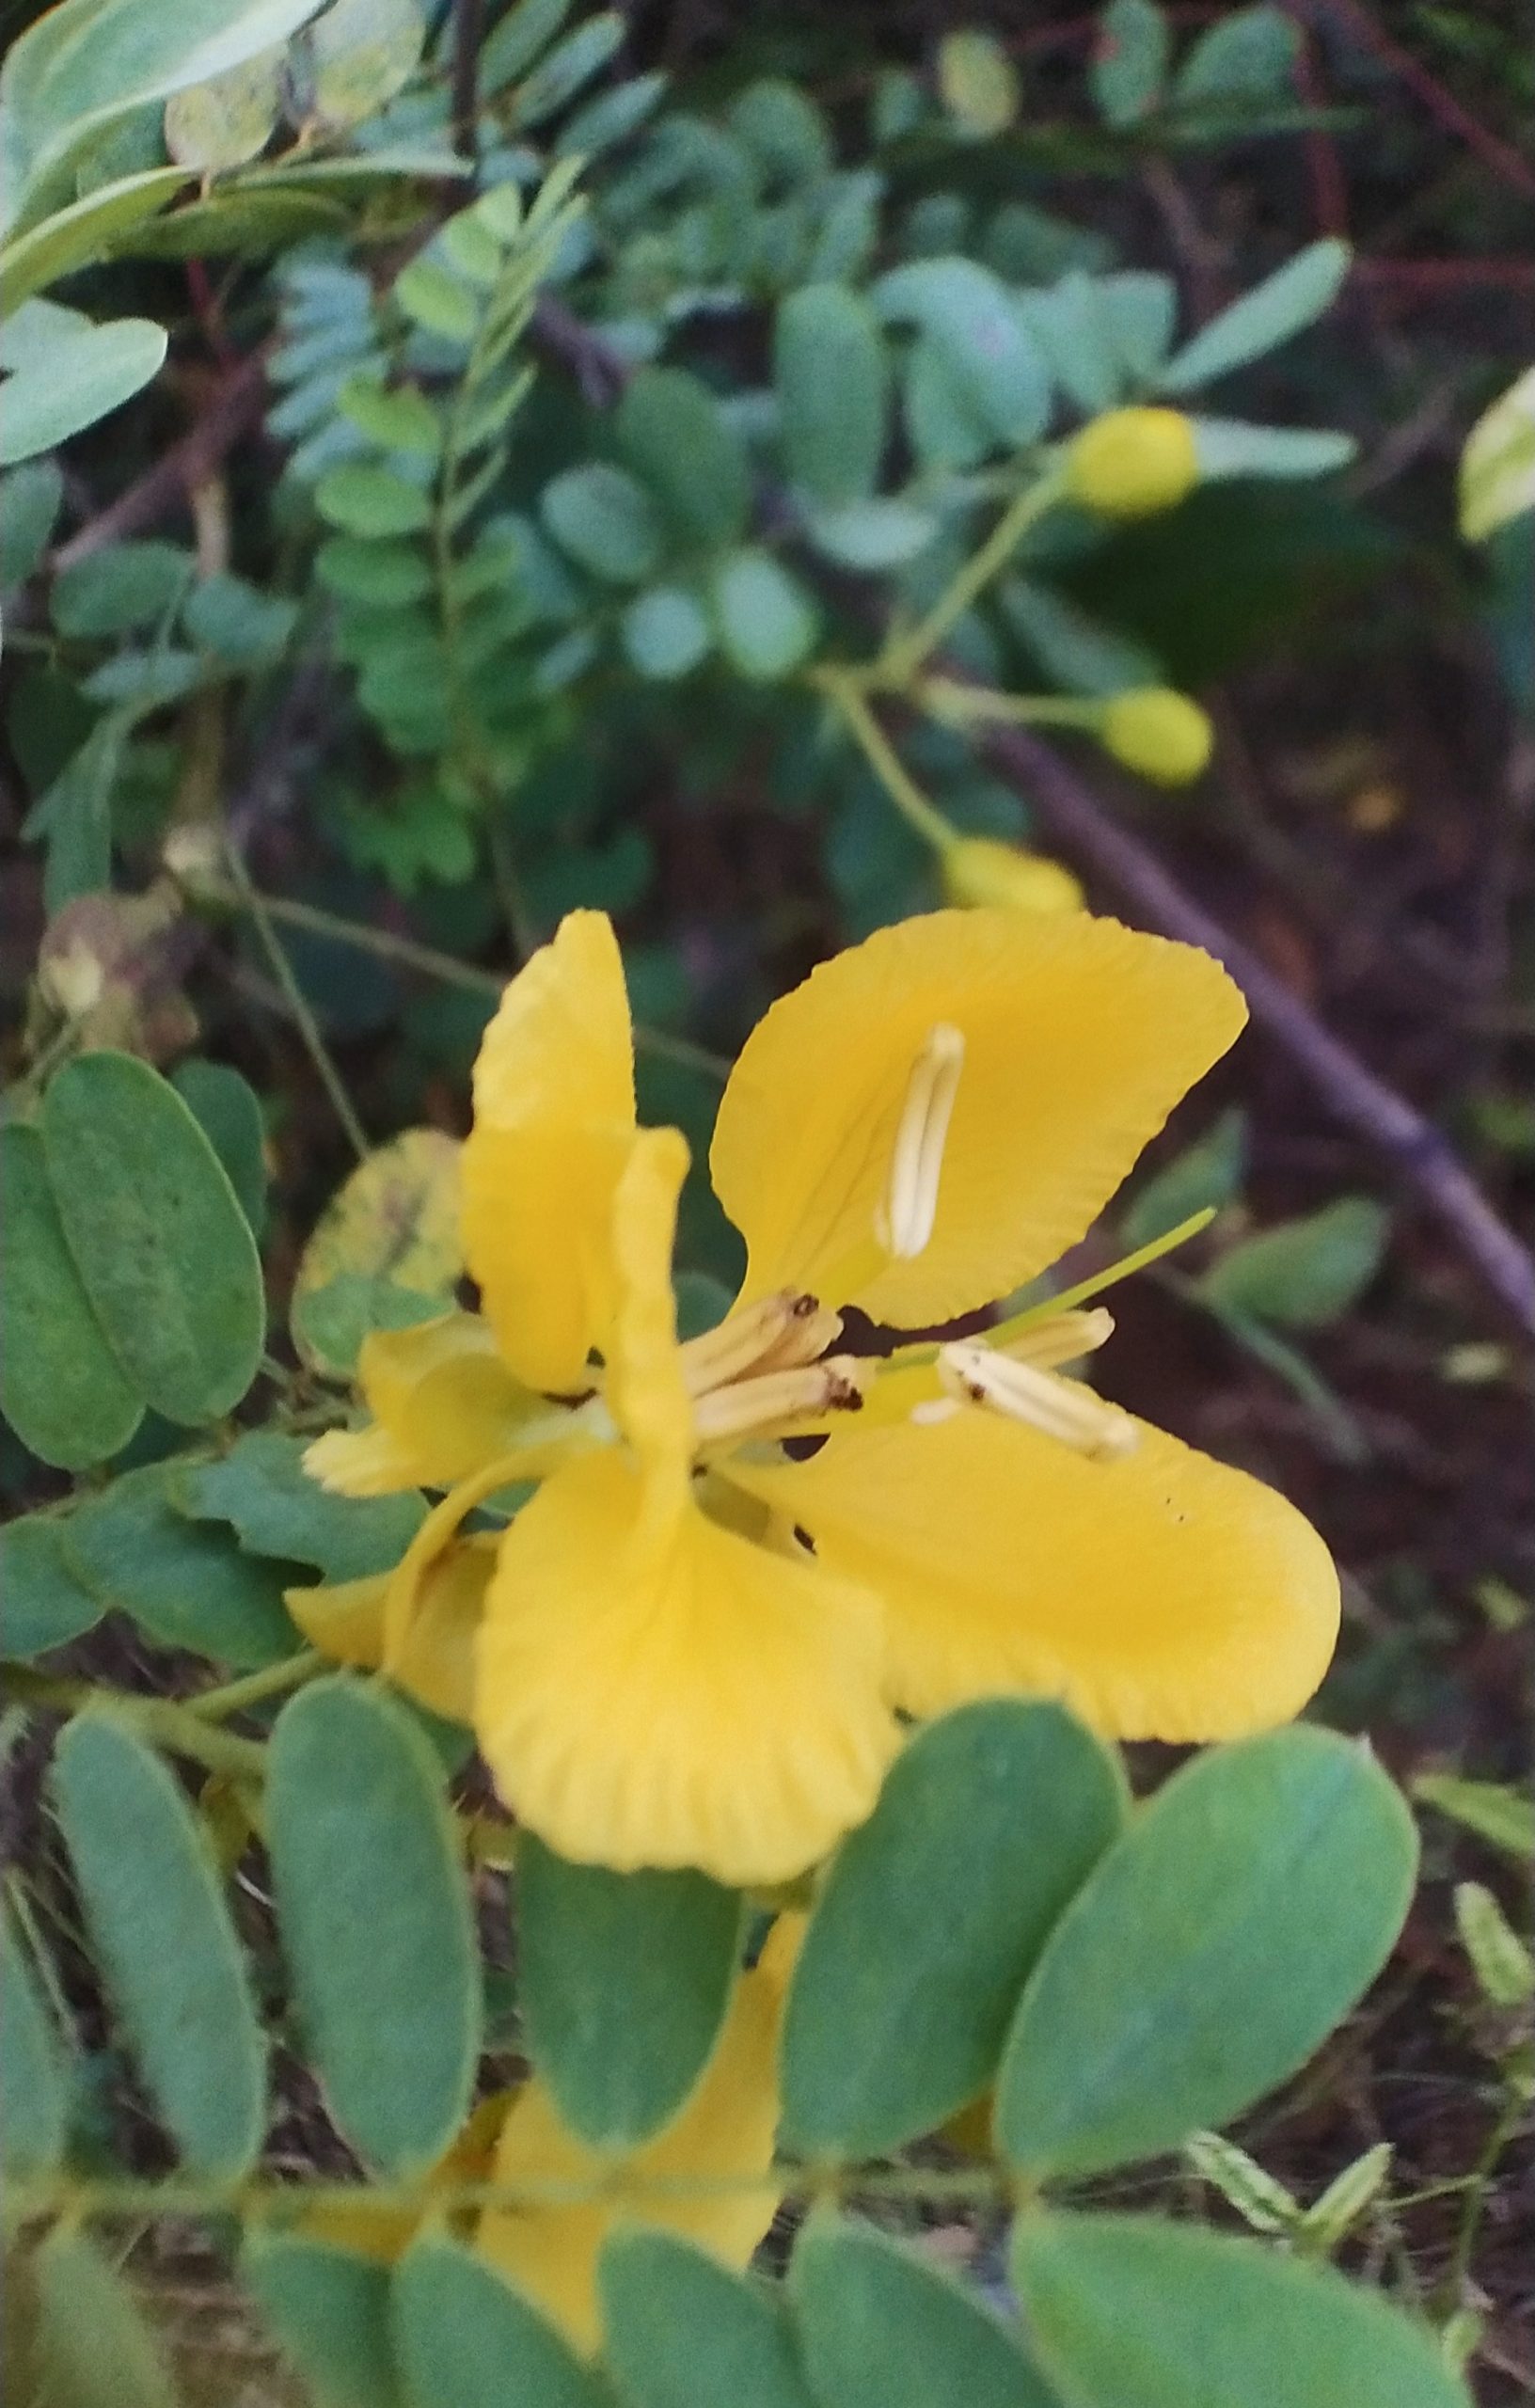 Blooming Yellow Flowers